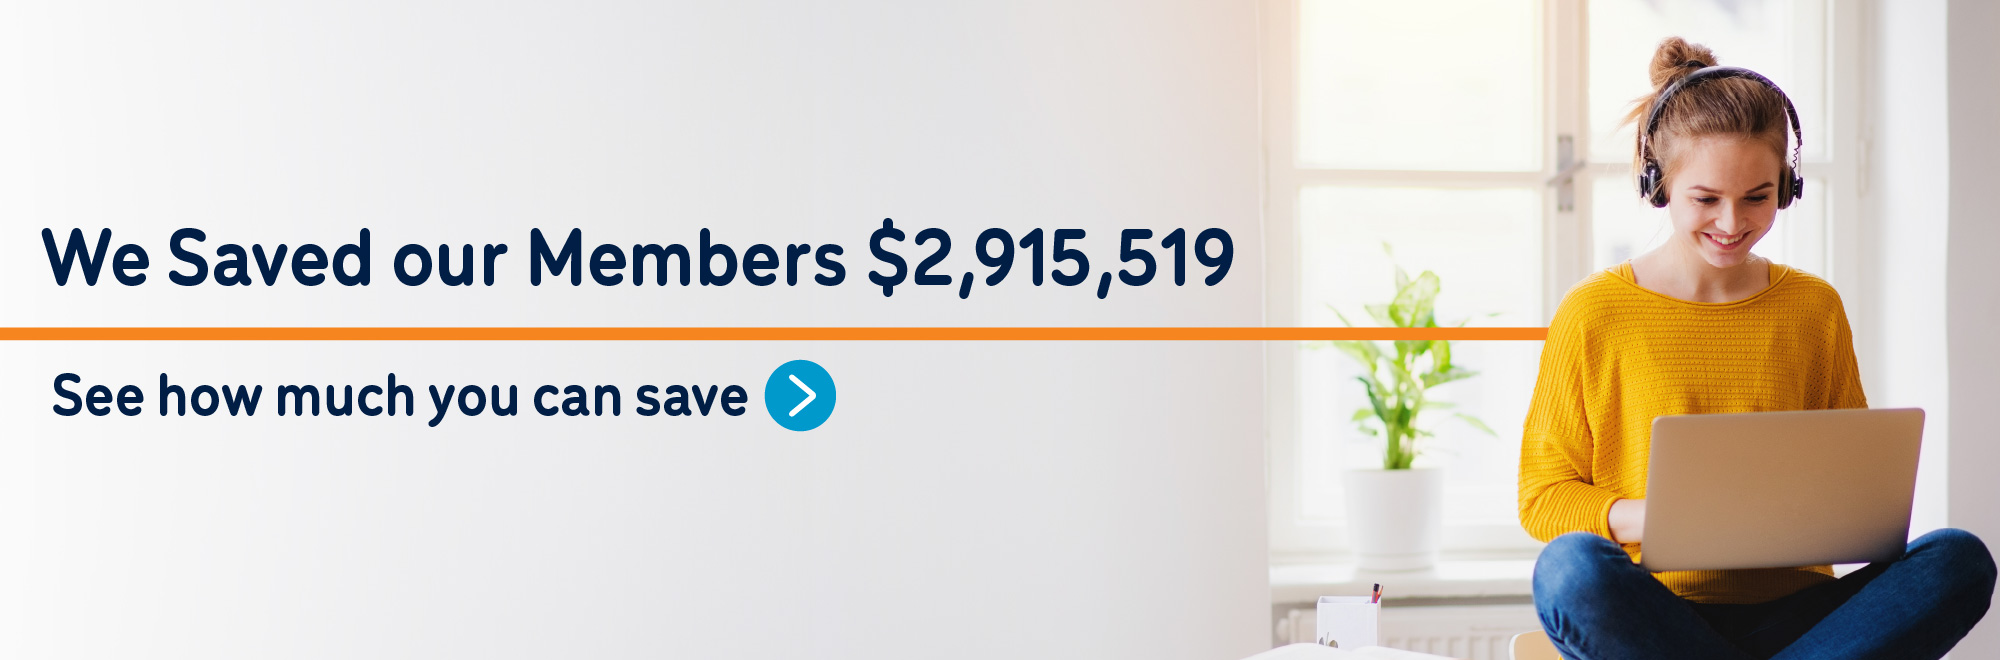 We saved our members $2,915,519. See how much you can save.